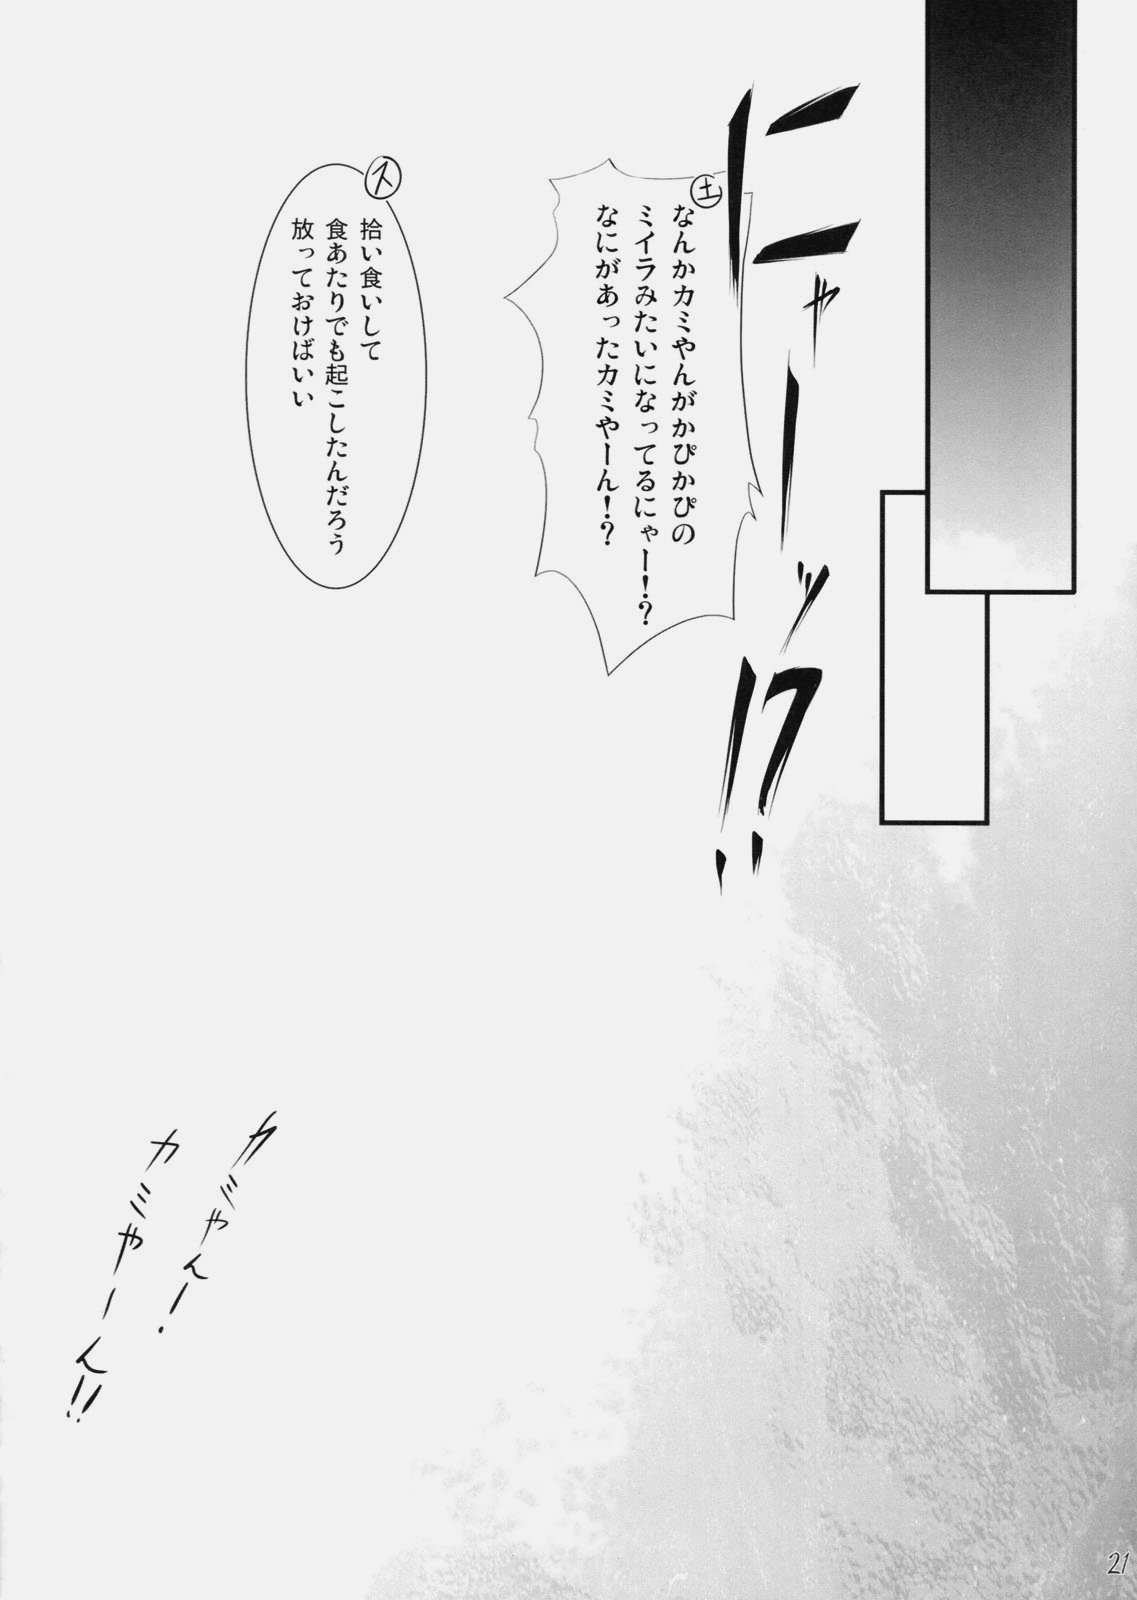 (COMIC1☆5) [In The Sky (中乃空)] おねぇさんsyndrome (とある魔術の禁書目録)